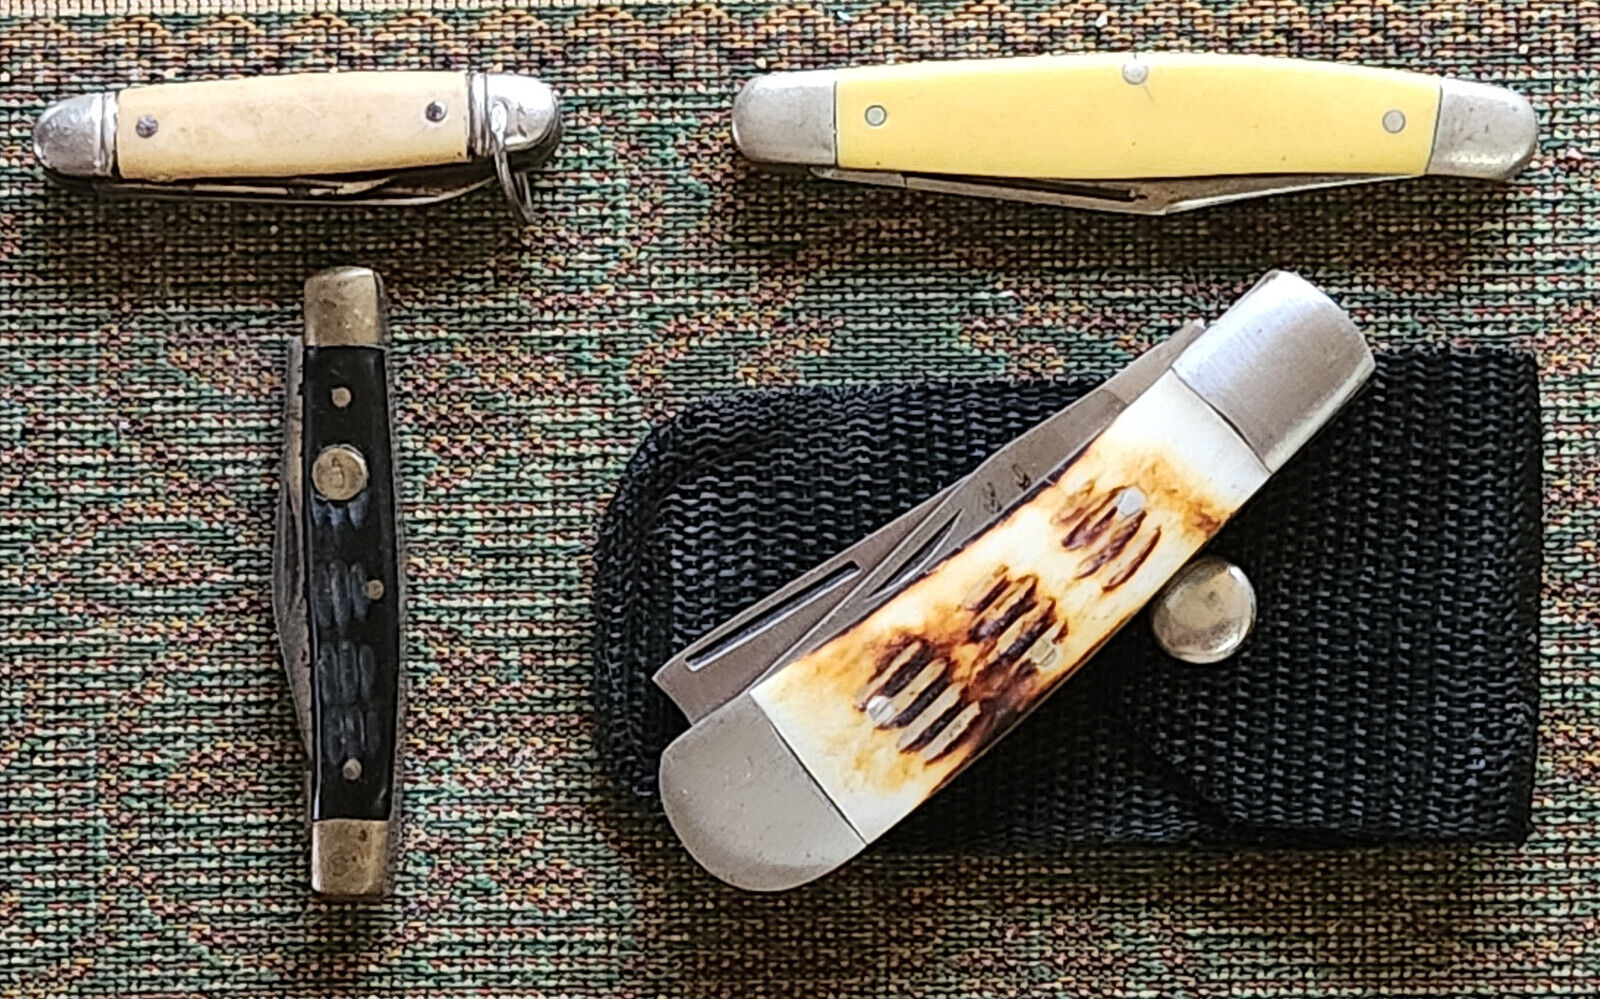 Pocket Knives Lot of 4 - Different Sizes, Brands